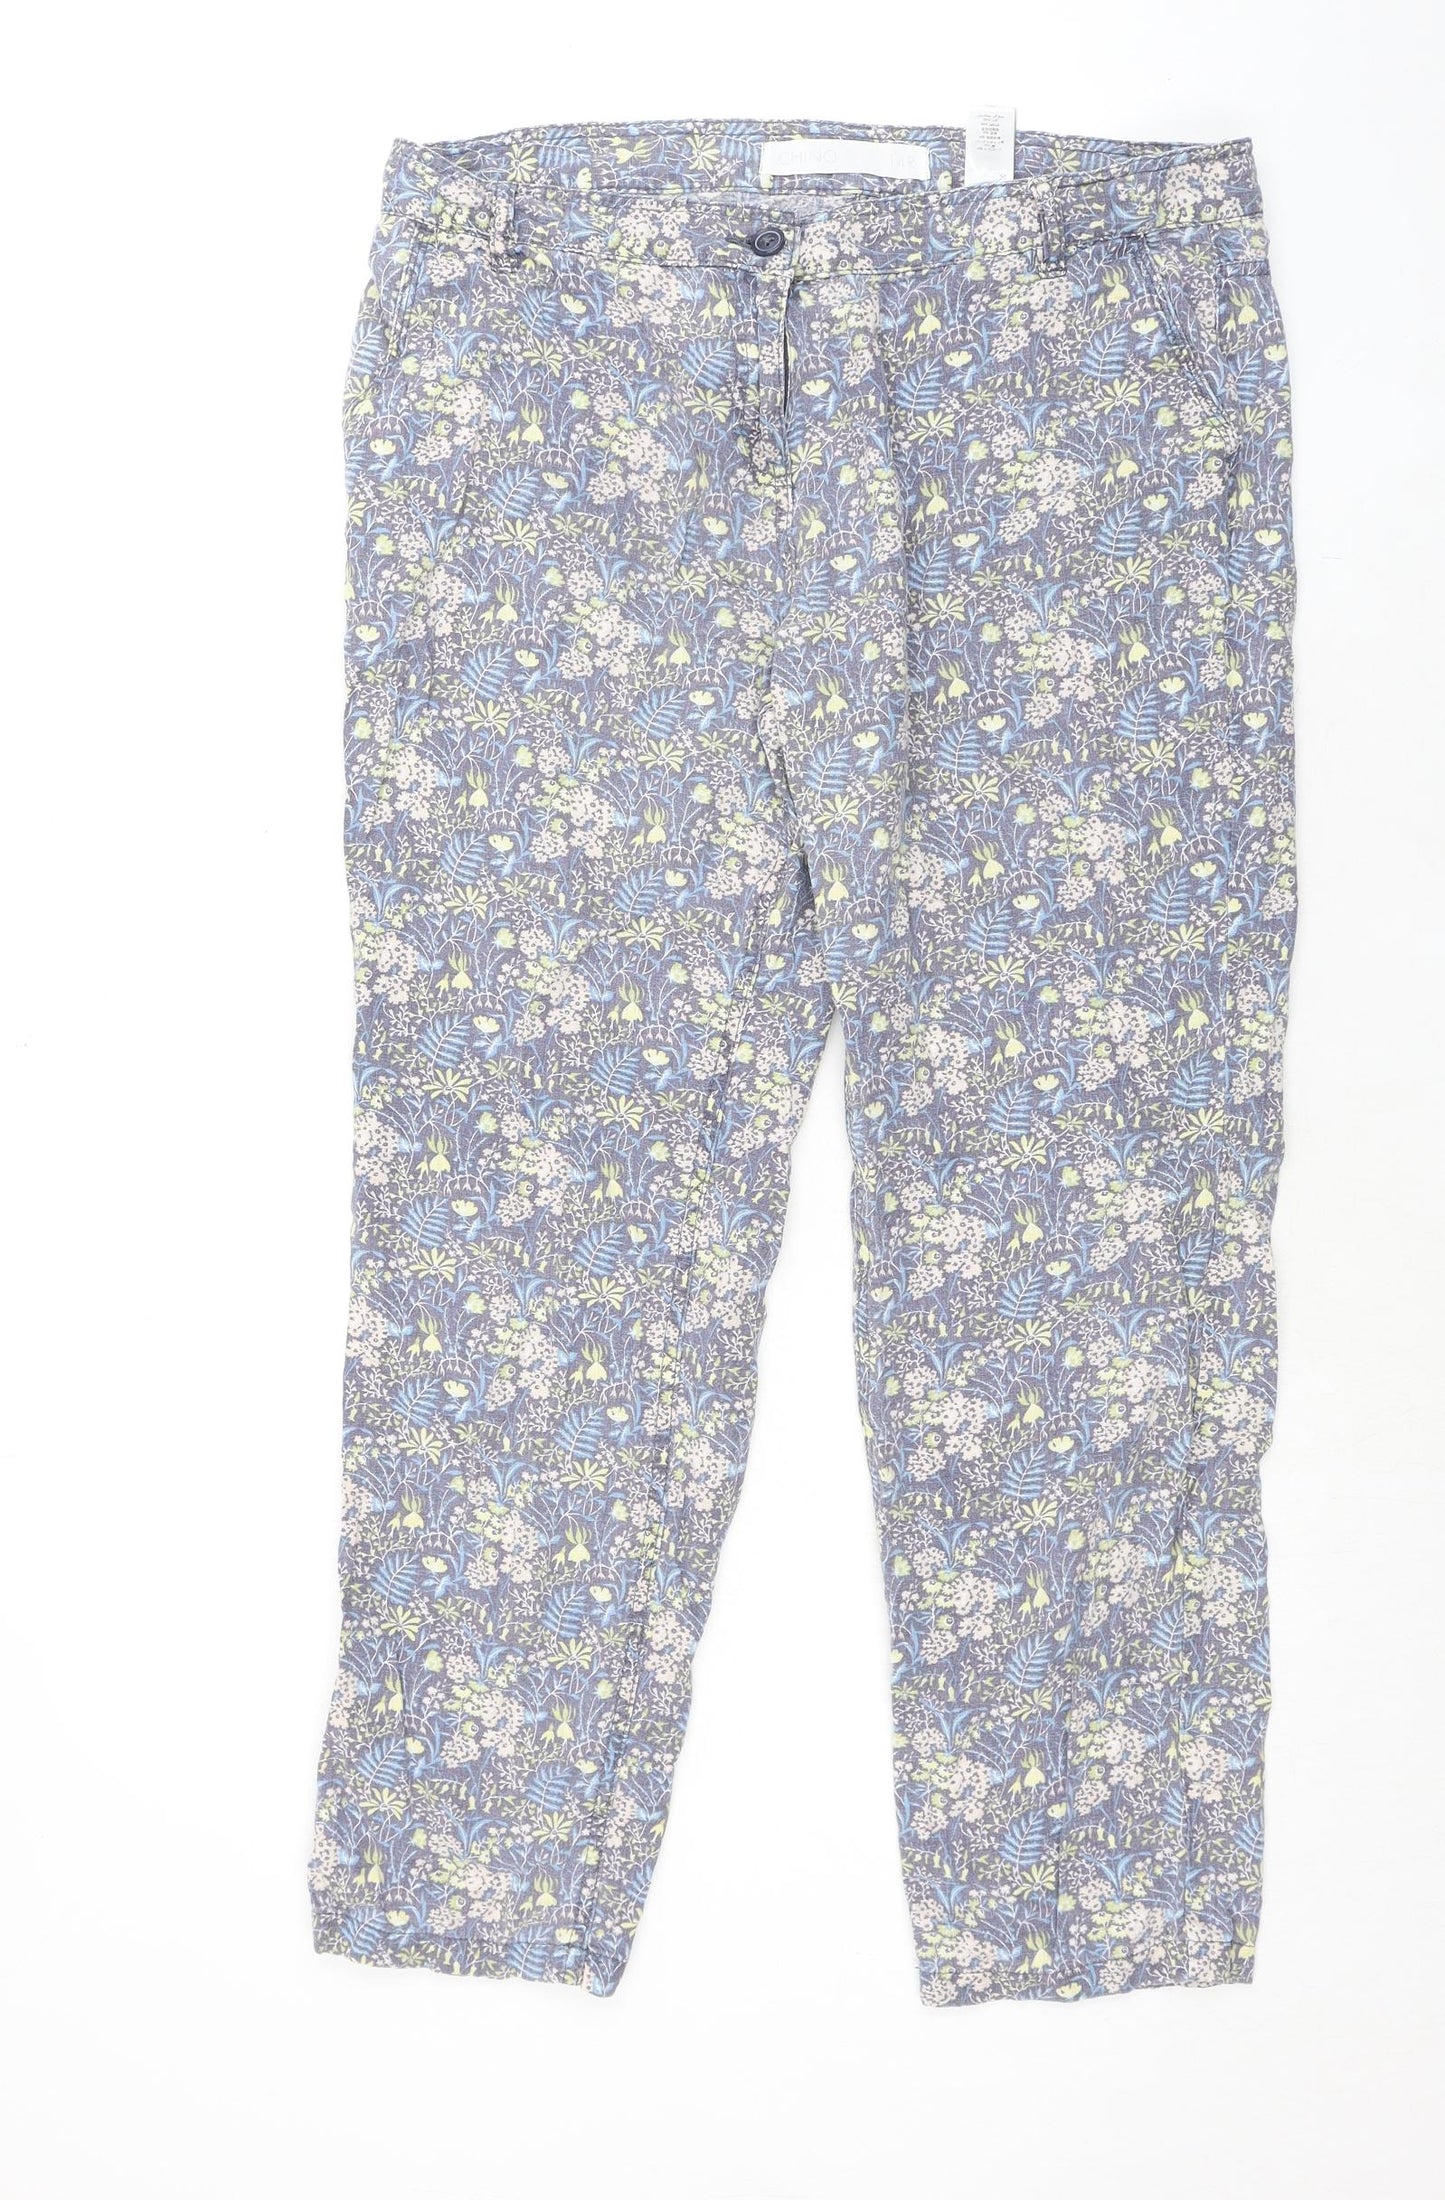 NEXT Womens Multicoloured Floral Linen Trousers Size 14 L28 in Regular Zip